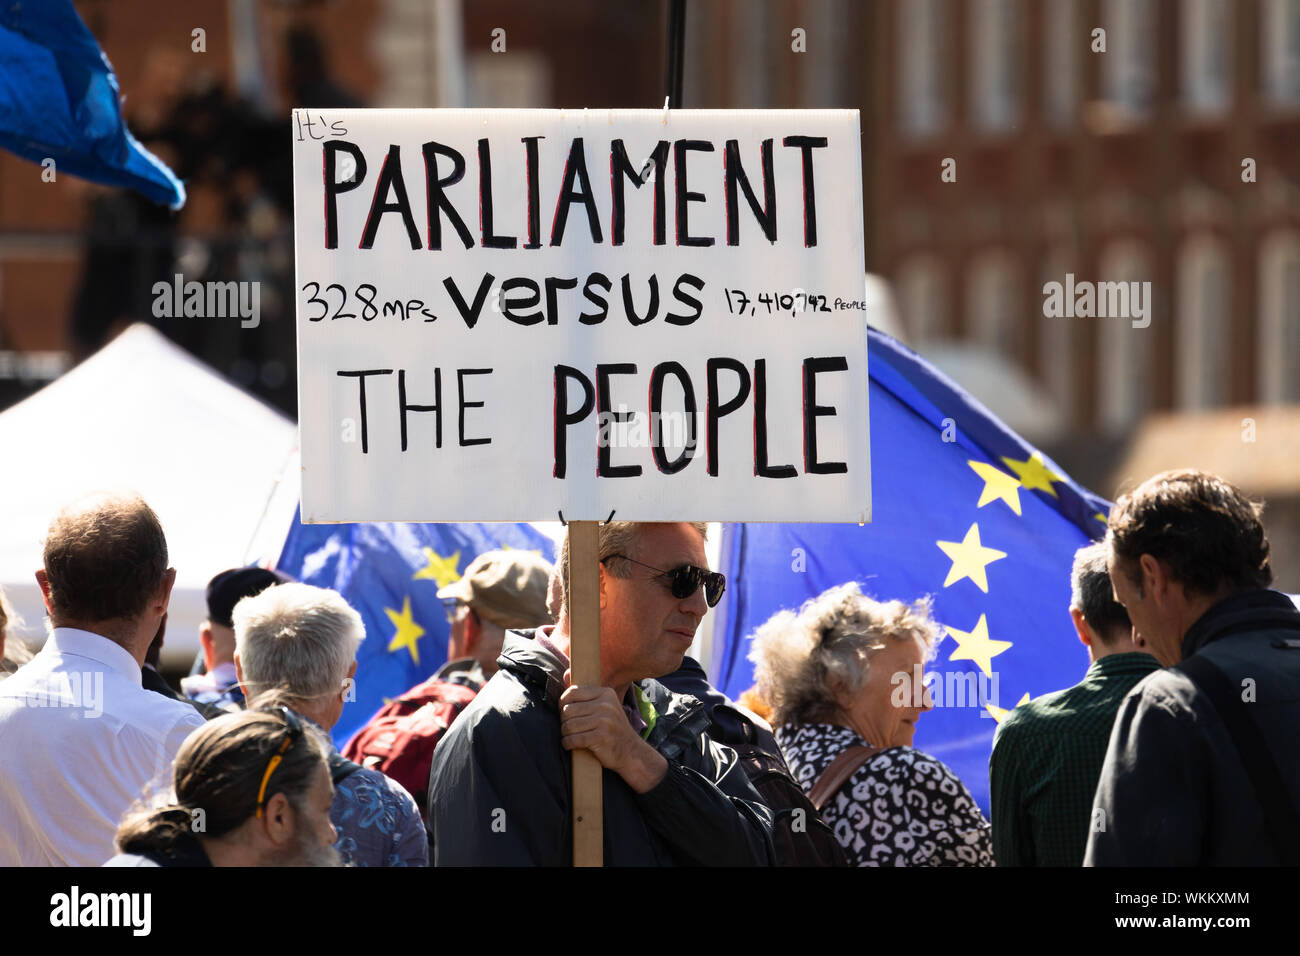 London, UK. 4th September 2019. A pro Brexit protester with a placard walks past pro remain protesters in Westminster. Today Members of Parliament (MP's) will vote on whether to block a no deal Brexit and hold a general election. Credit: London Pix/Alamy Live News Stock Photo